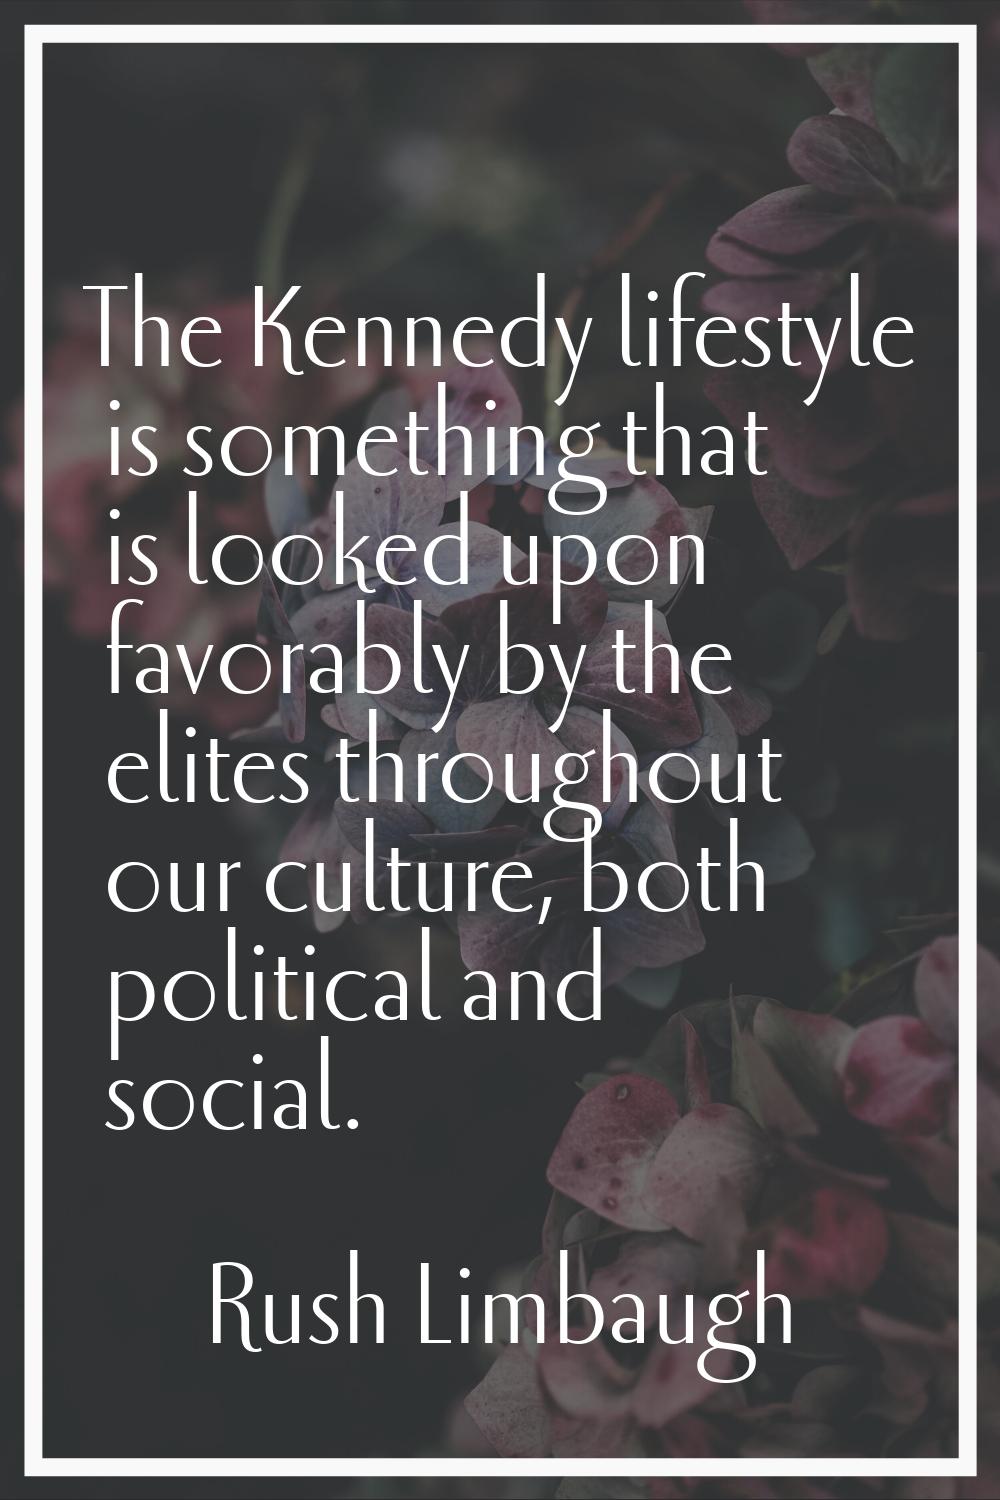 The Kennedy lifestyle is something that is looked upon favorably by the elites throughout our cultu